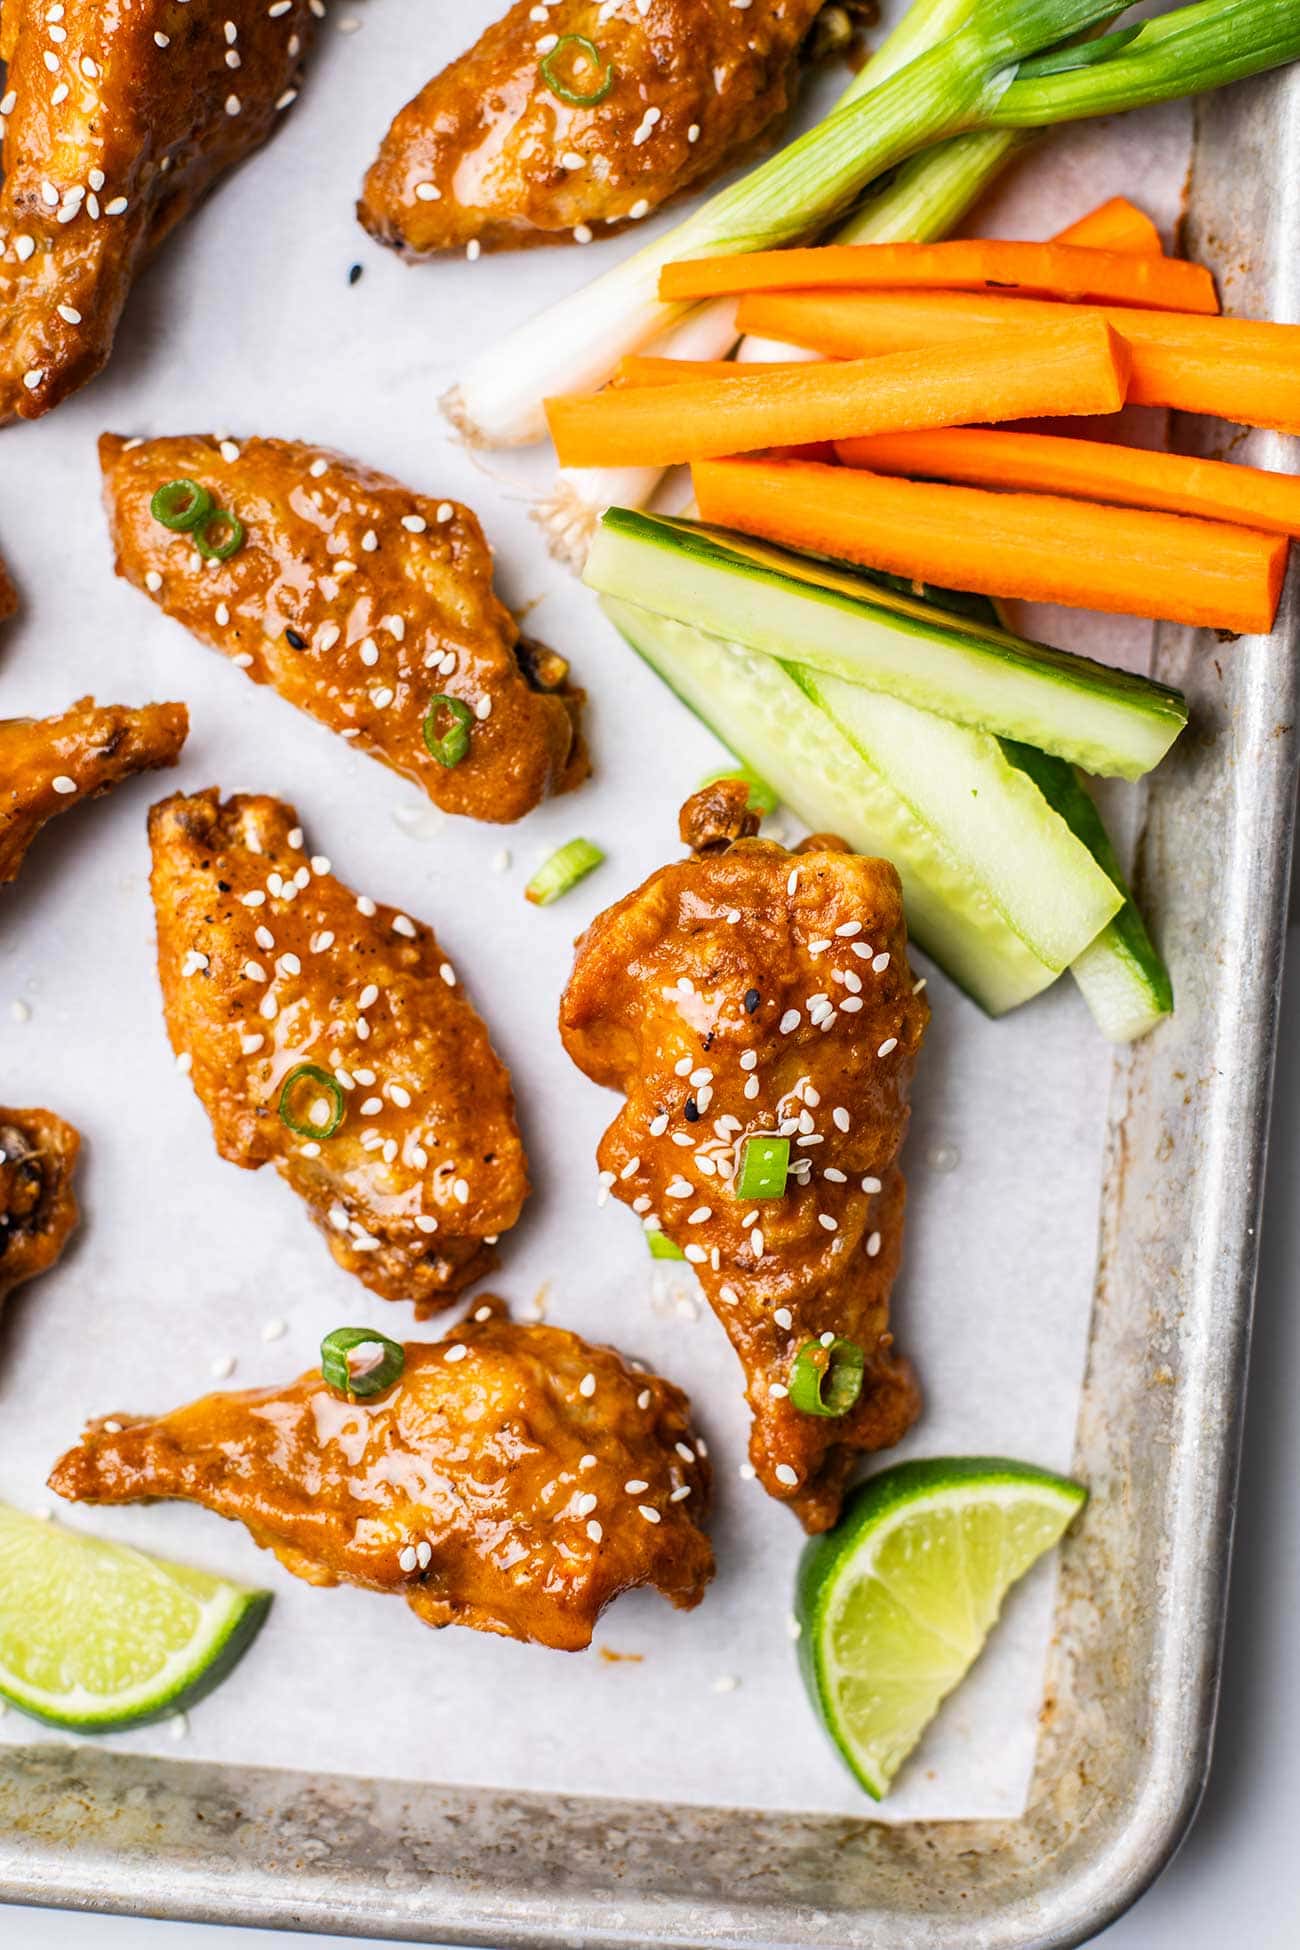 A close up look at crispy chicken wings drenched in a spicy Thai chili sauce and served with cucumbers and carrots.